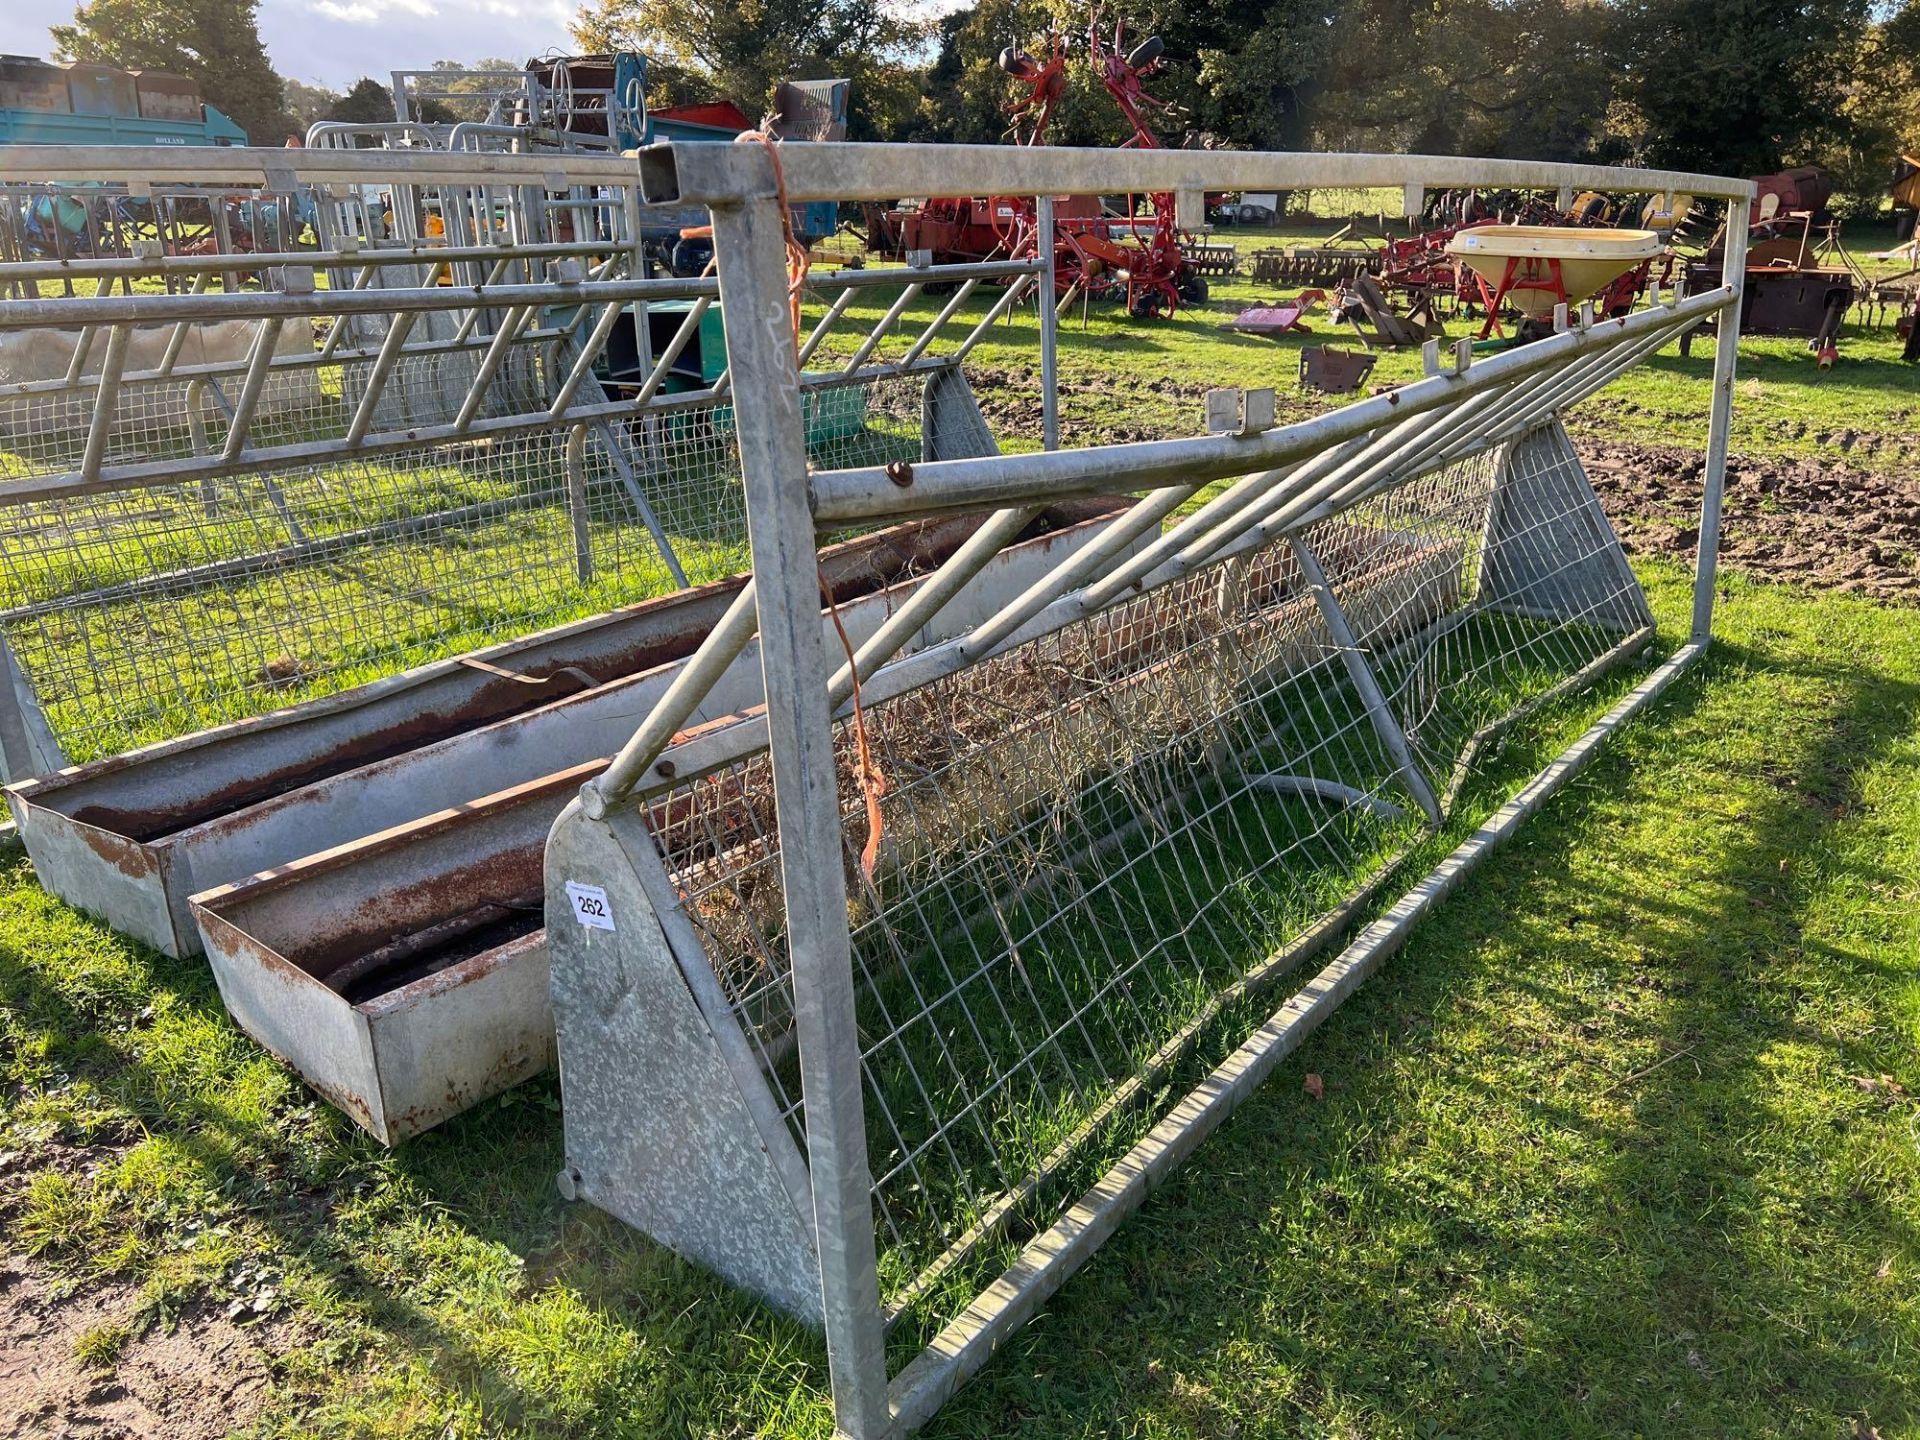 Cattle feed barrier and trough